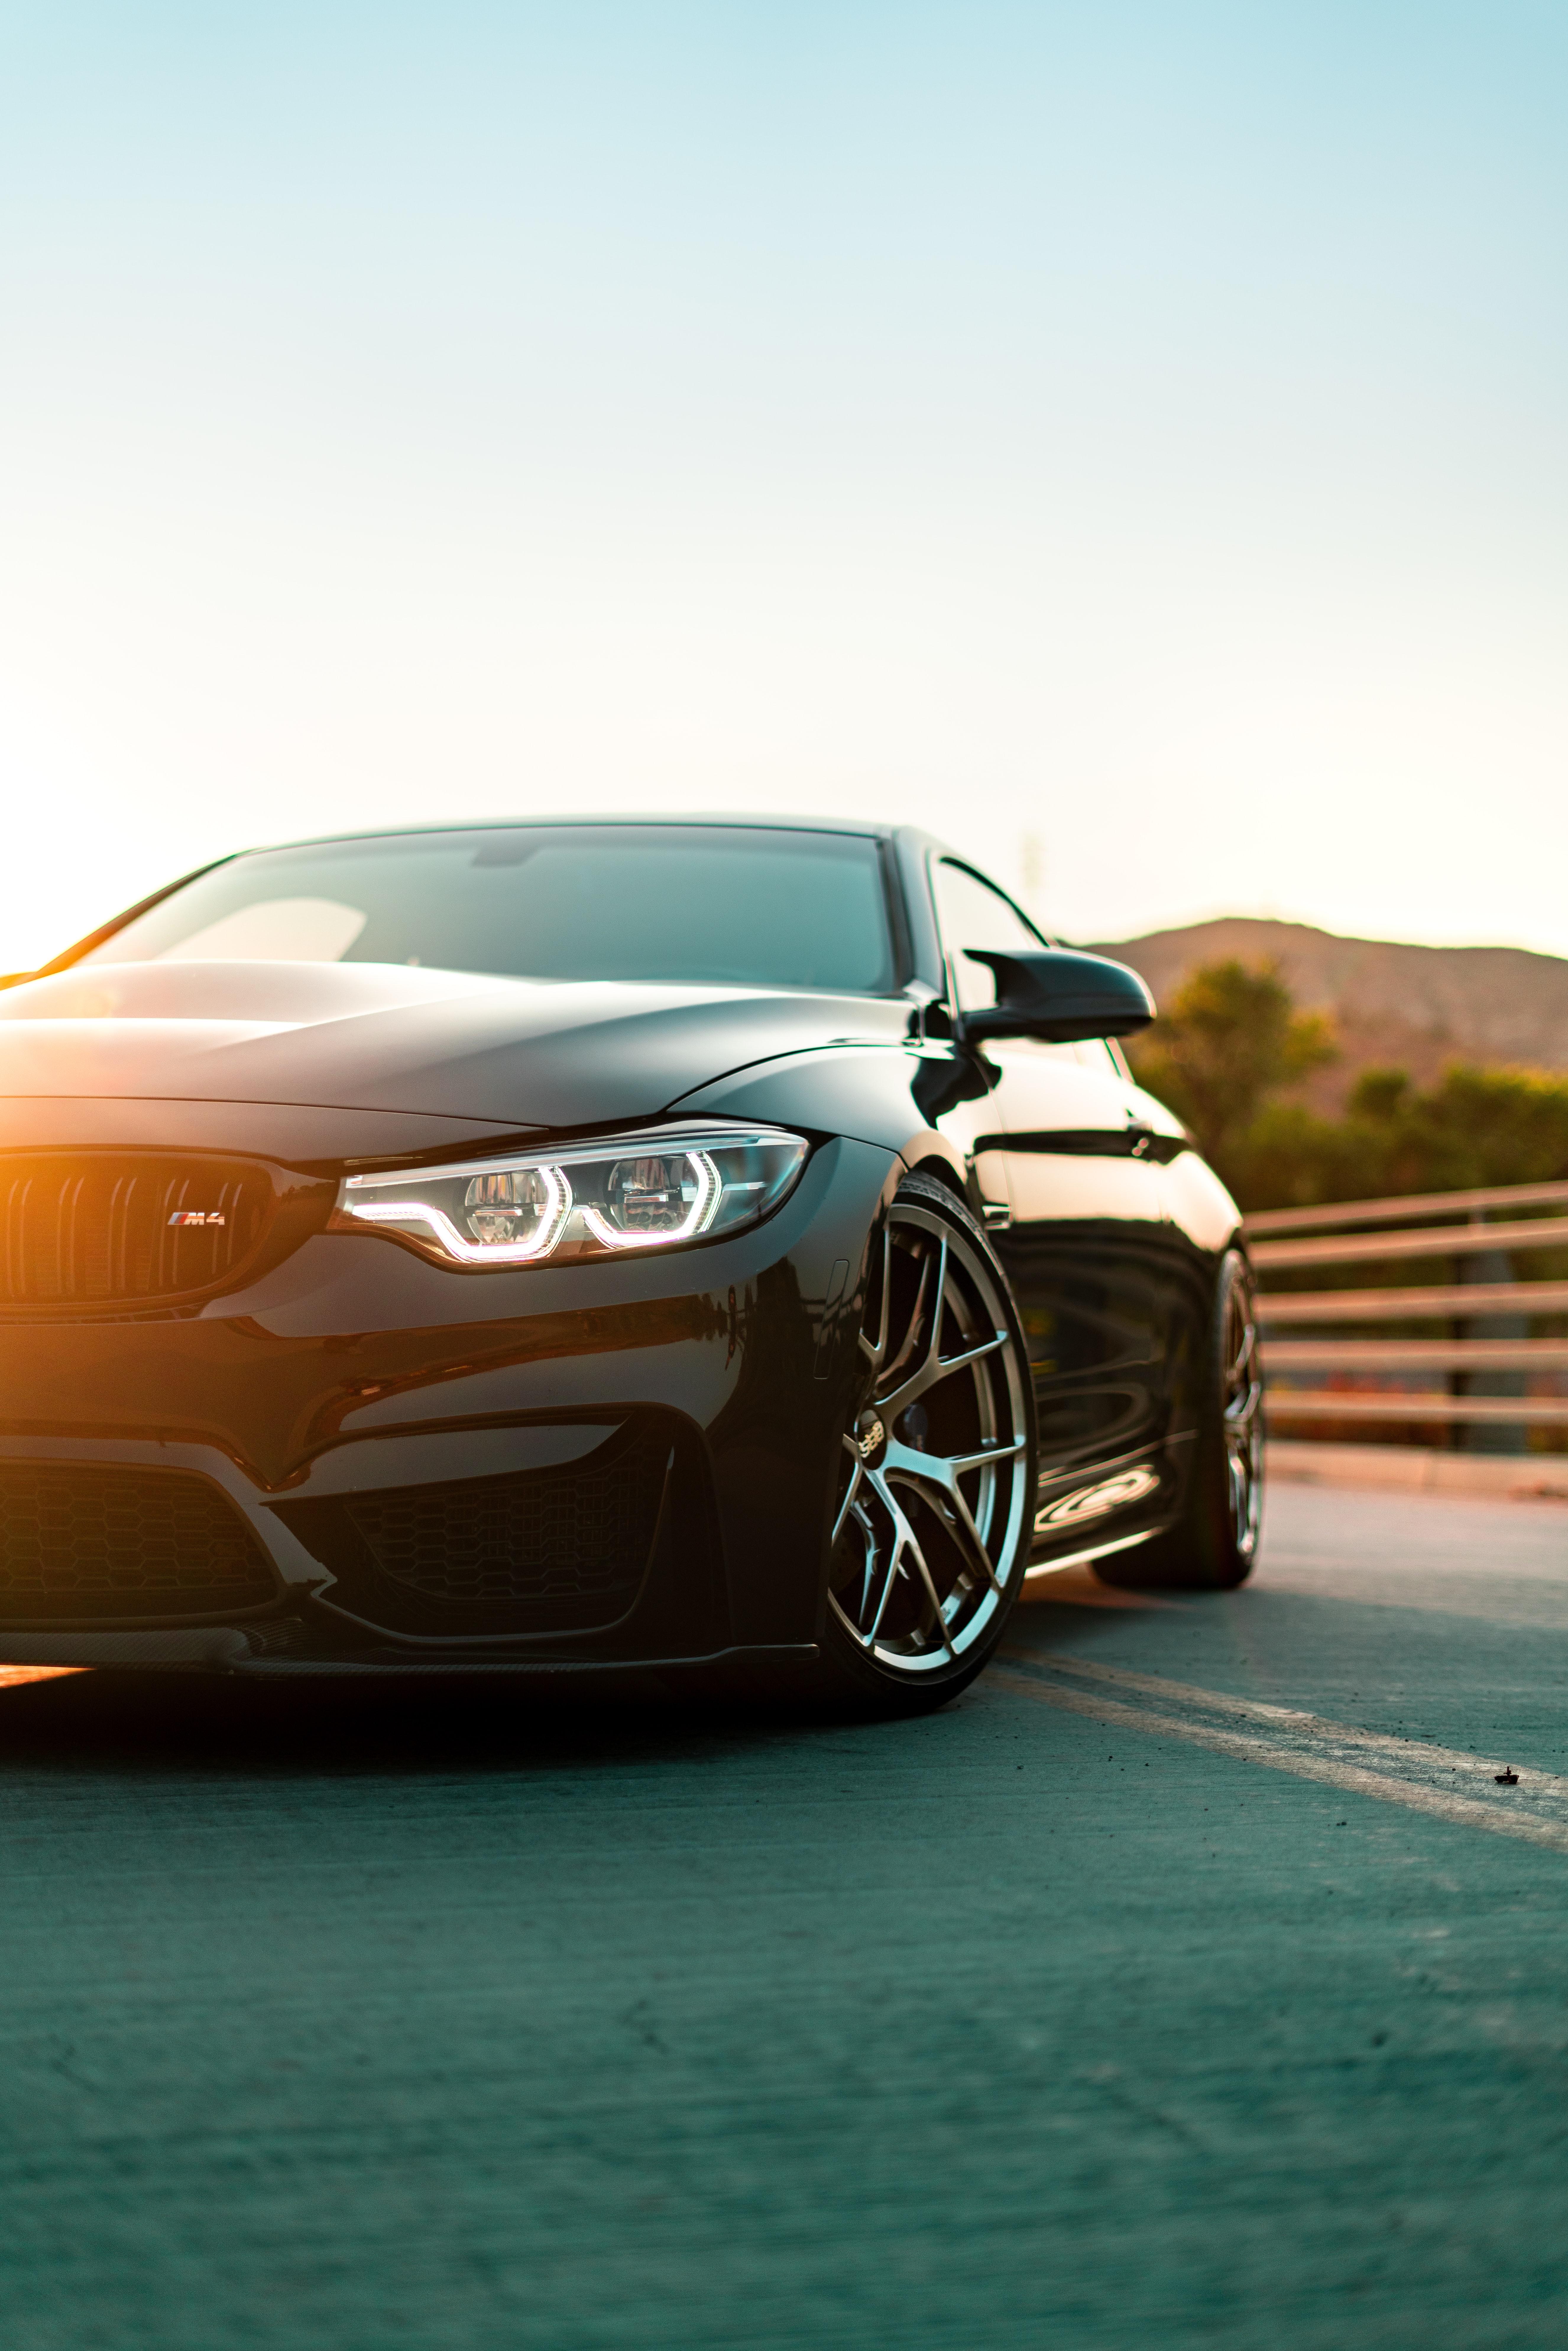 bmw, cars, black, car, front view, headlight, bmw m4 Aesthetic wallpaper